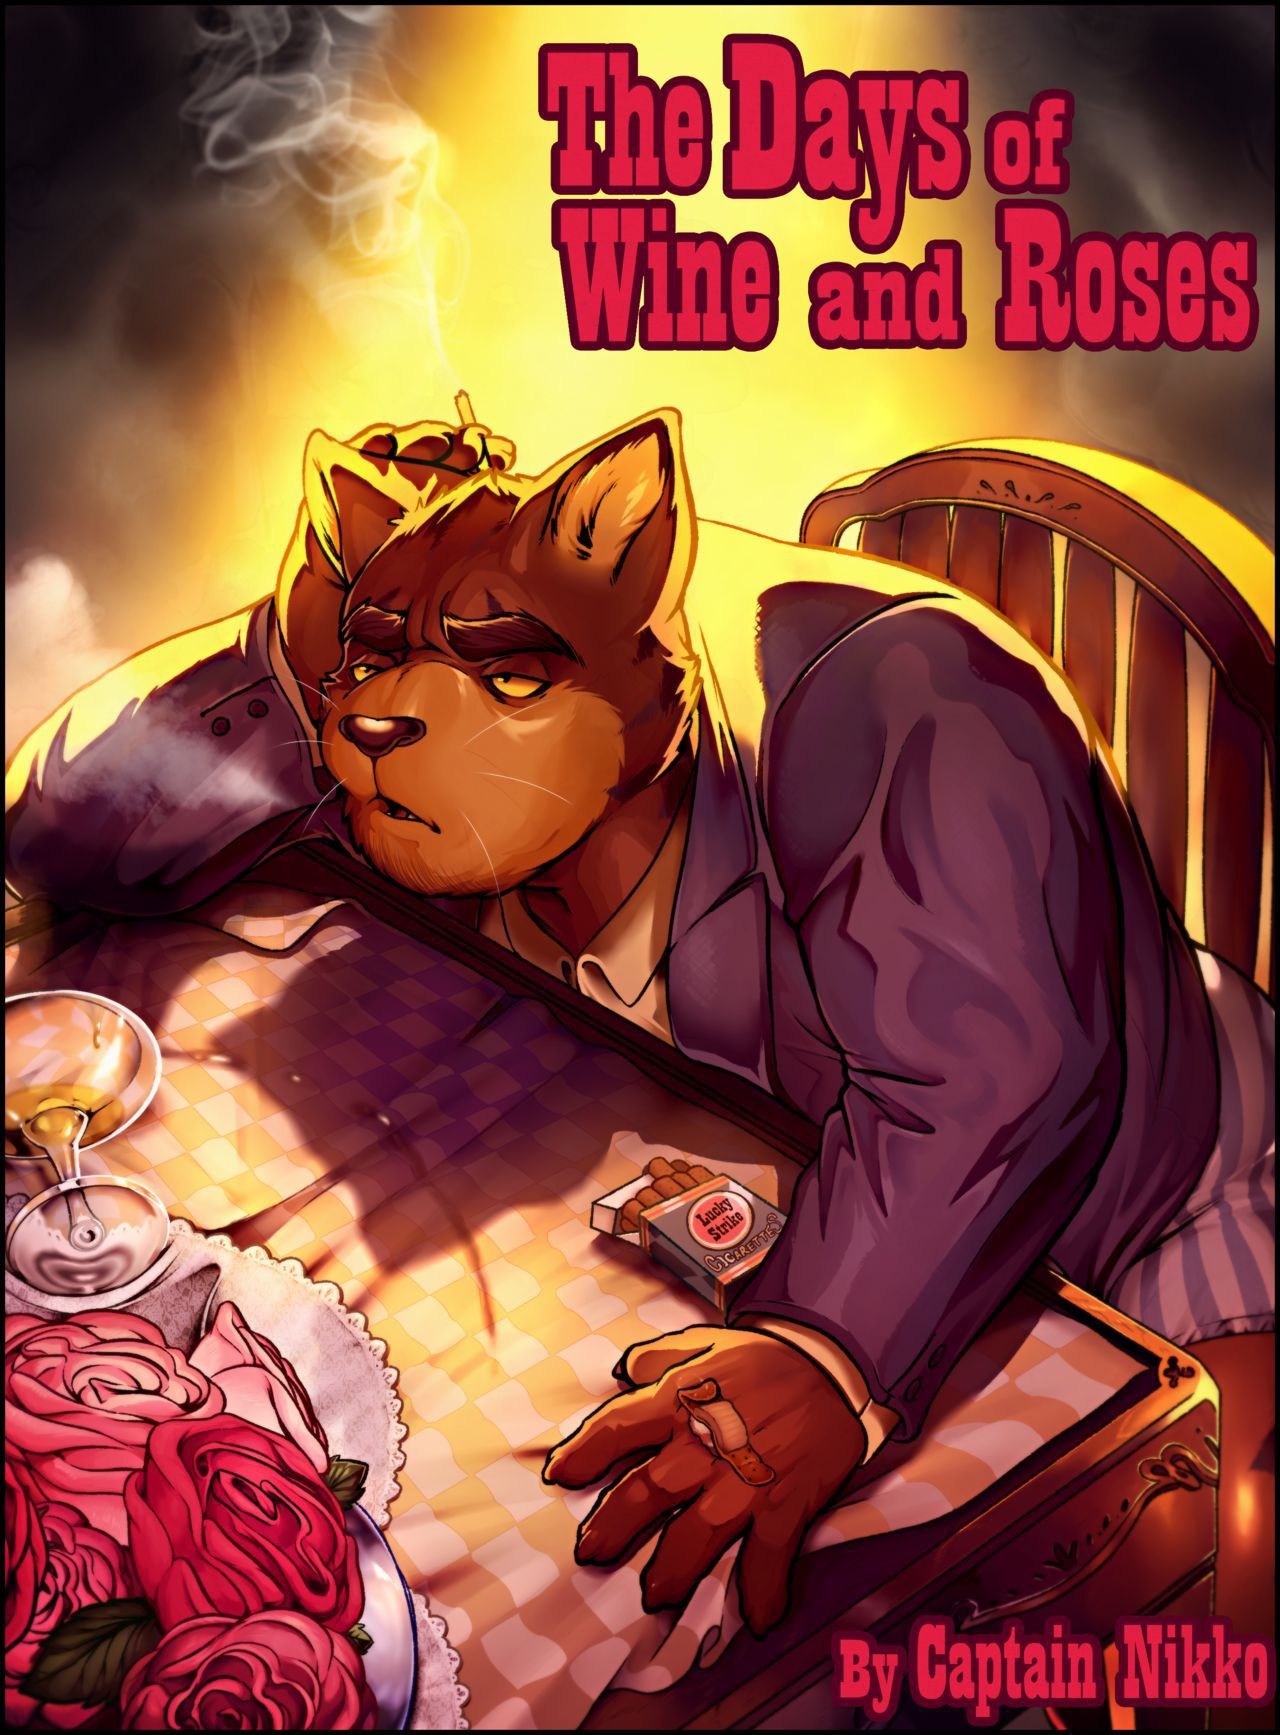 And [Captain Nikko] The Days Of Wine And Roses (Ongoing) Trio